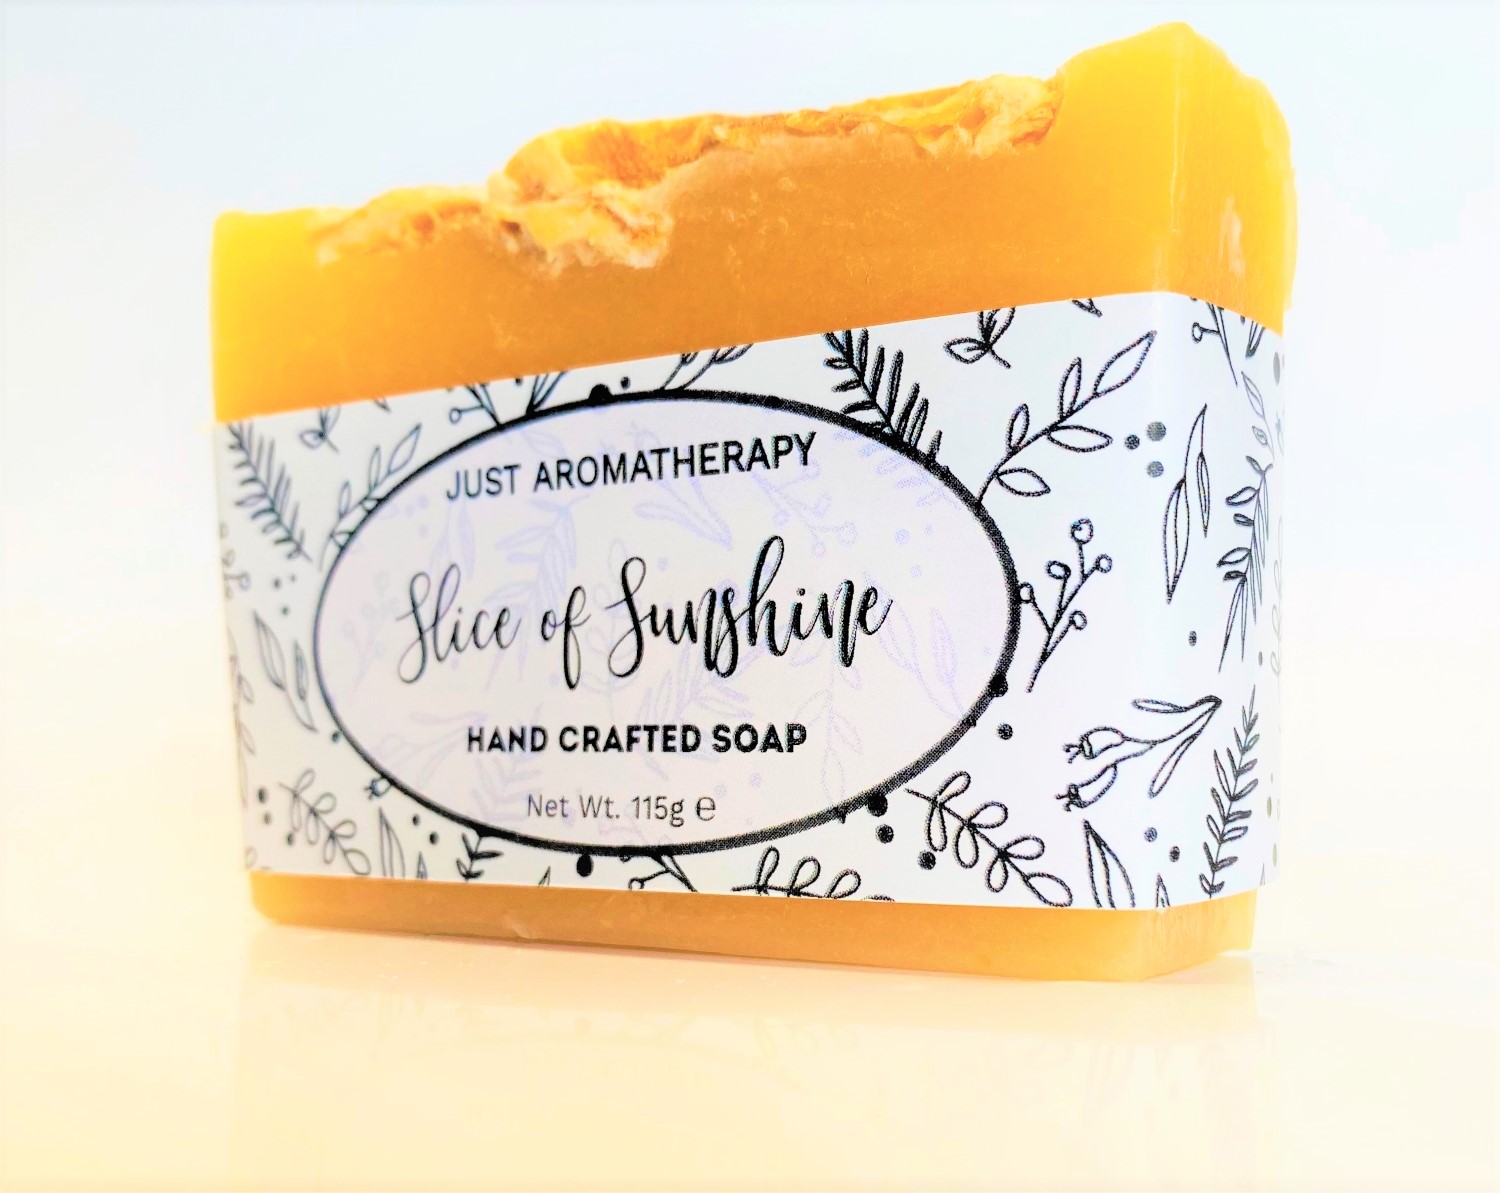 Slice of Sunshine - Wild & Natural Hand Crafted Soap